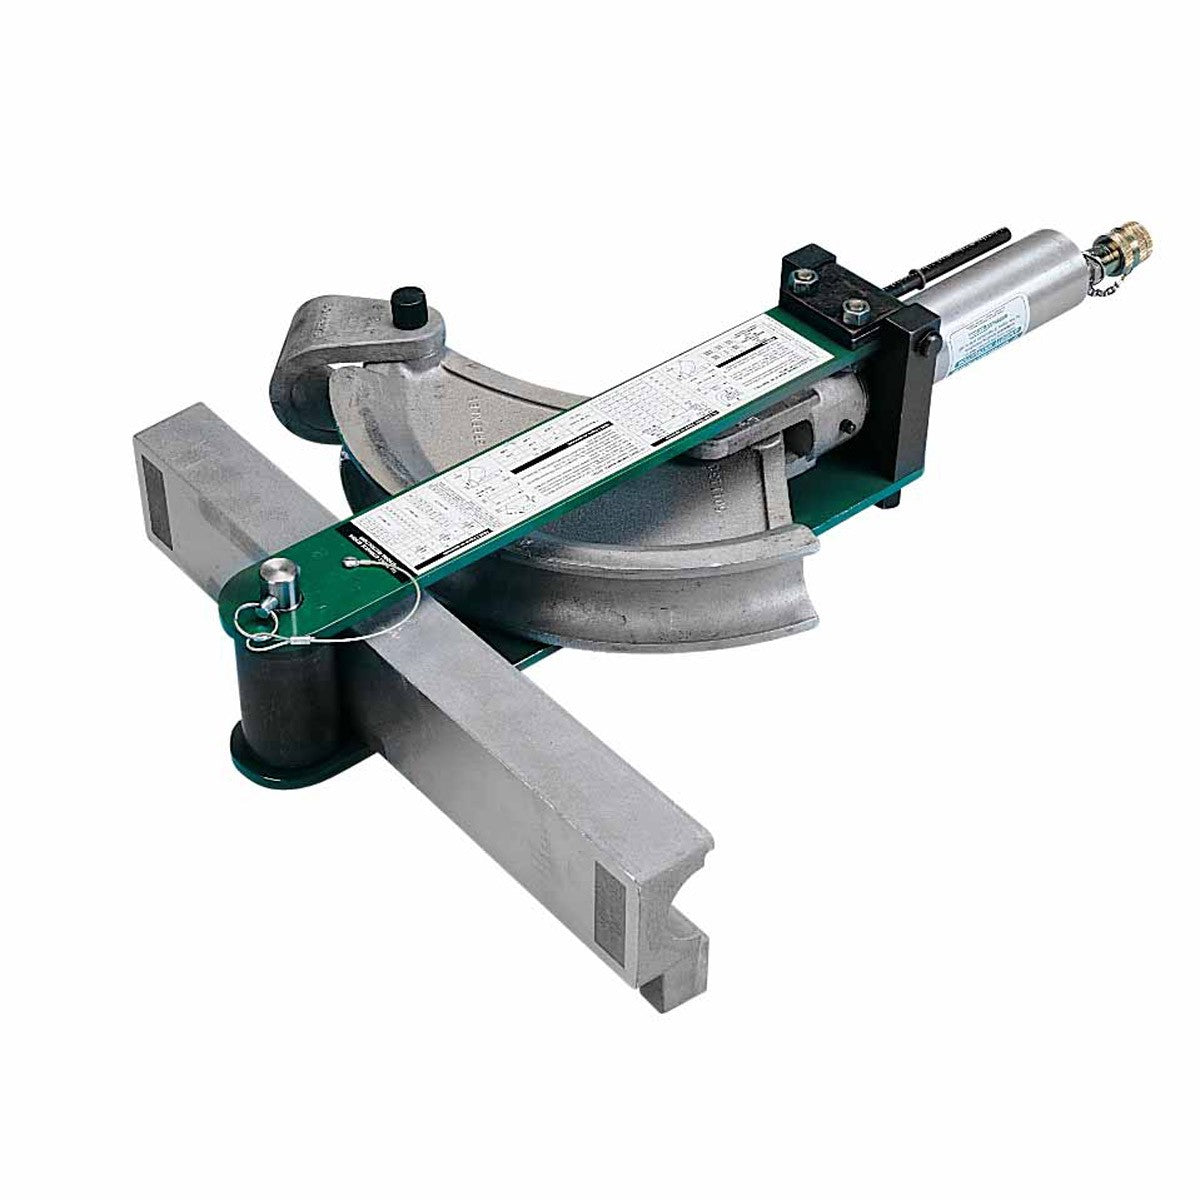 Greenlee 882 Flip-Top Bender for 1-1/4" - 2" EMT without Hydraulic Pump